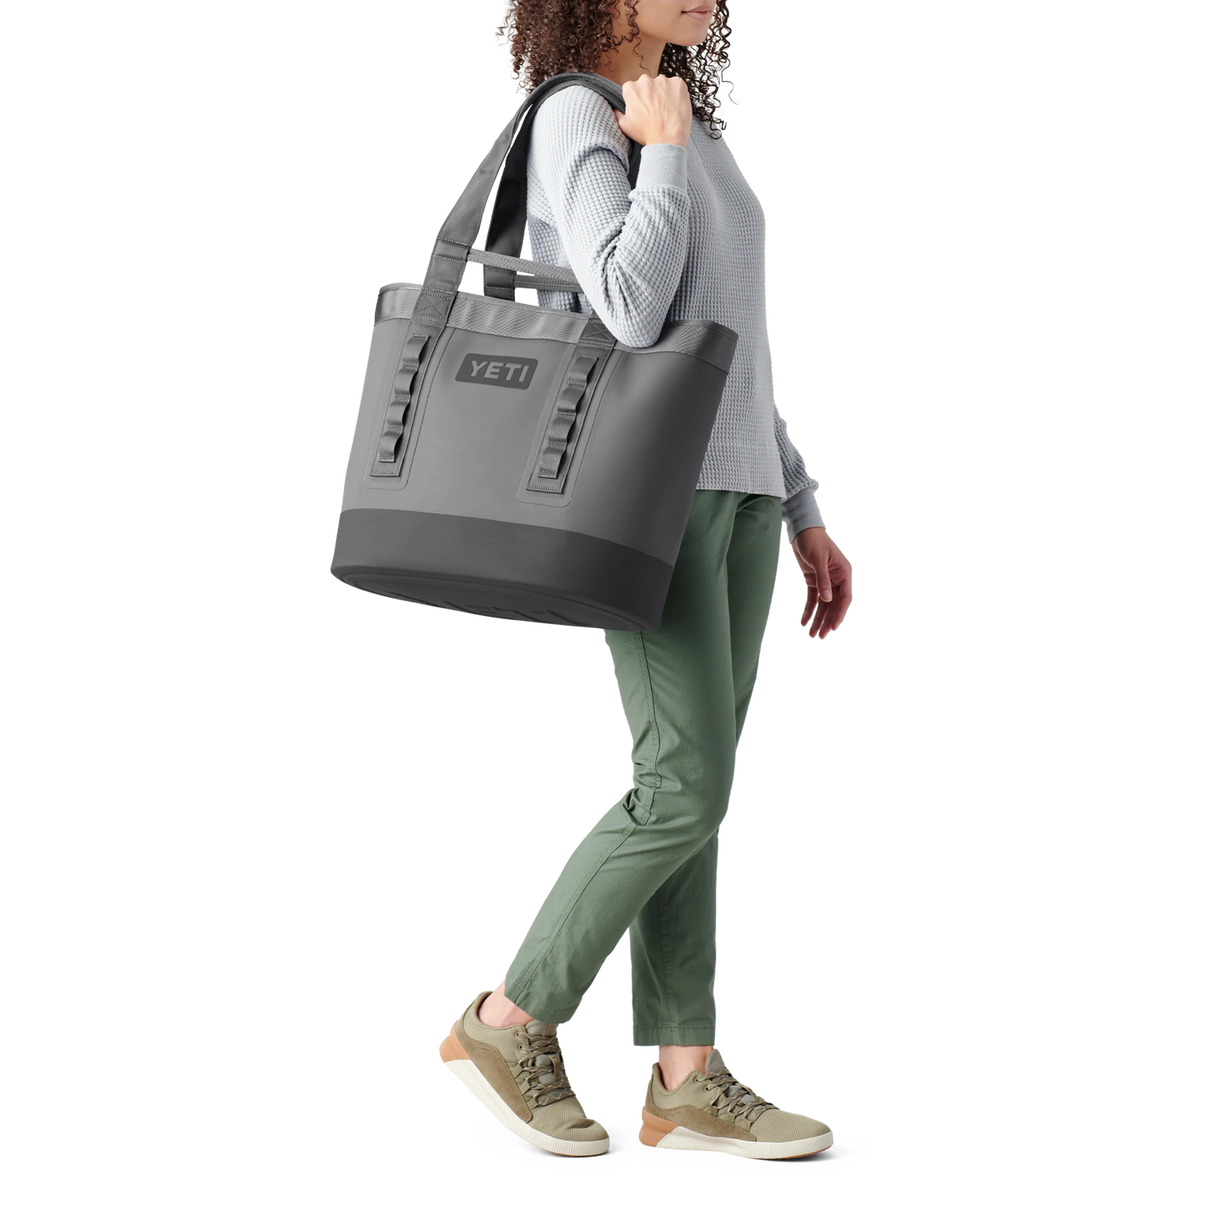 YETI Camino Carryall 35 2.0 Tote Bag Limited Color - Canopy Green